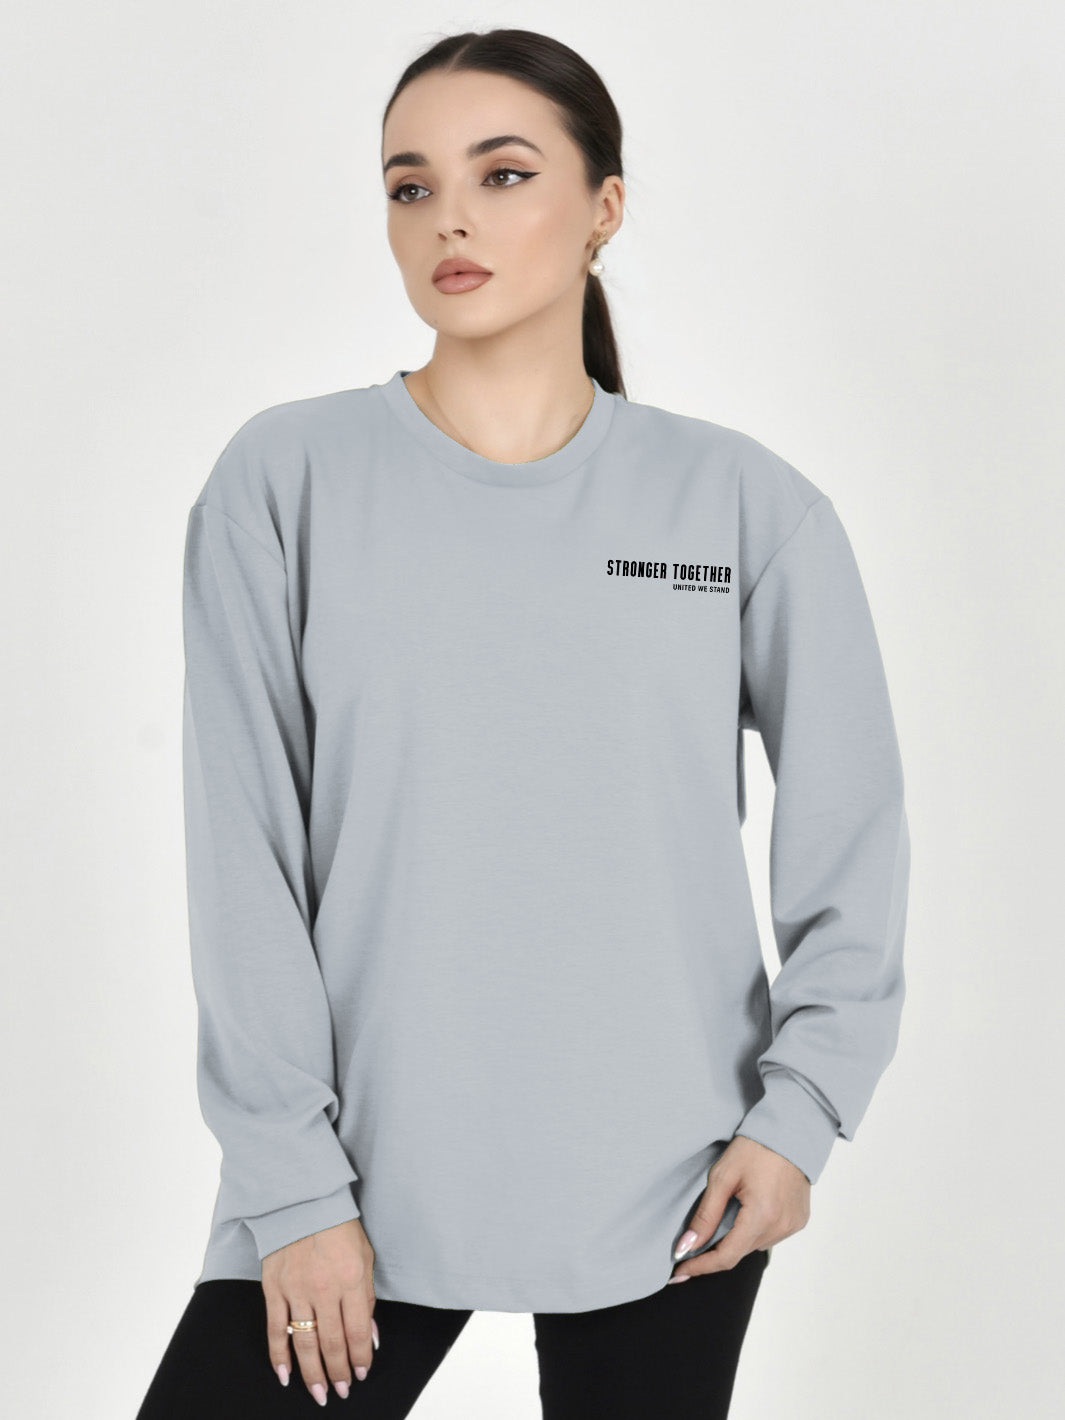 ADST Long Sleeves T-Shirt